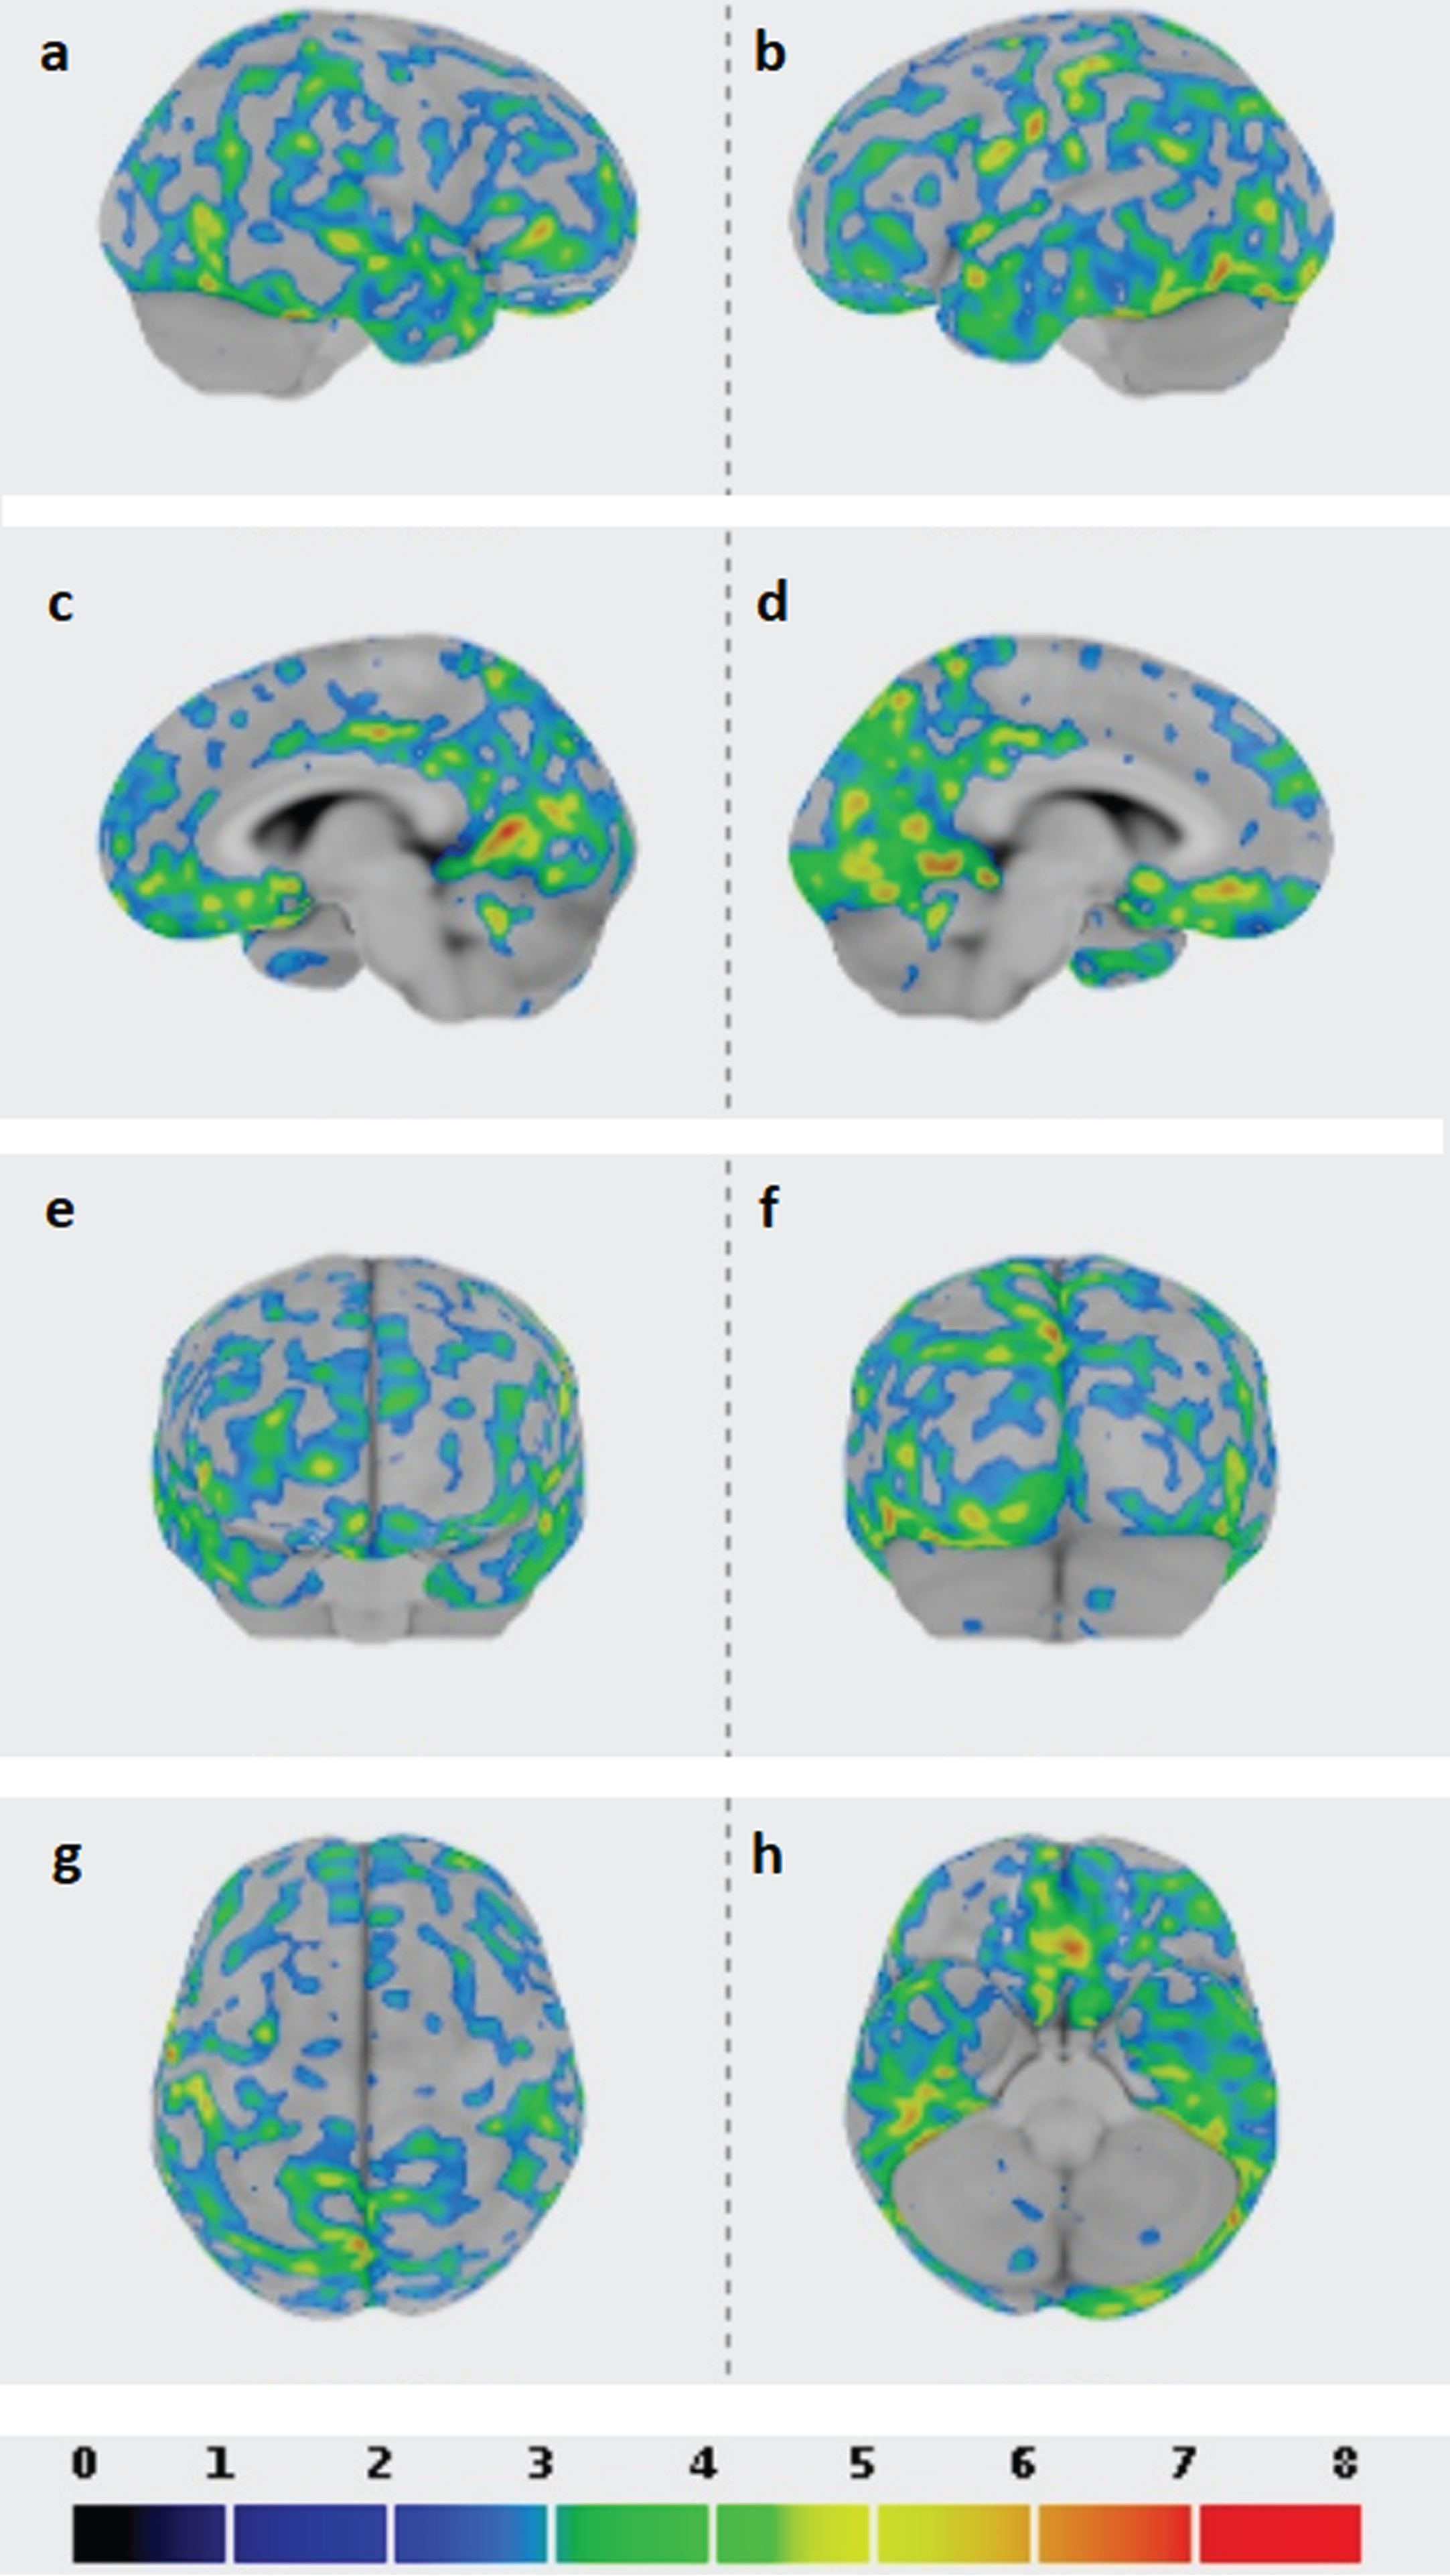 Z-SCORE images are shown with a dedicated color table at the bottom of the figure (from 0 to 8), a threshold of 2 SD applied to the images; cerebellum whole as reference region in the ROI analysis performed with CortexID software; higher Z-score and standardized uptake value ratio (SUVR) for the occipital regions. a) right lateral view; b) left lateral view; c) right medial view; d) left medial view; e) anterior view; f) posterior view; g) superior view; h) inferior view.